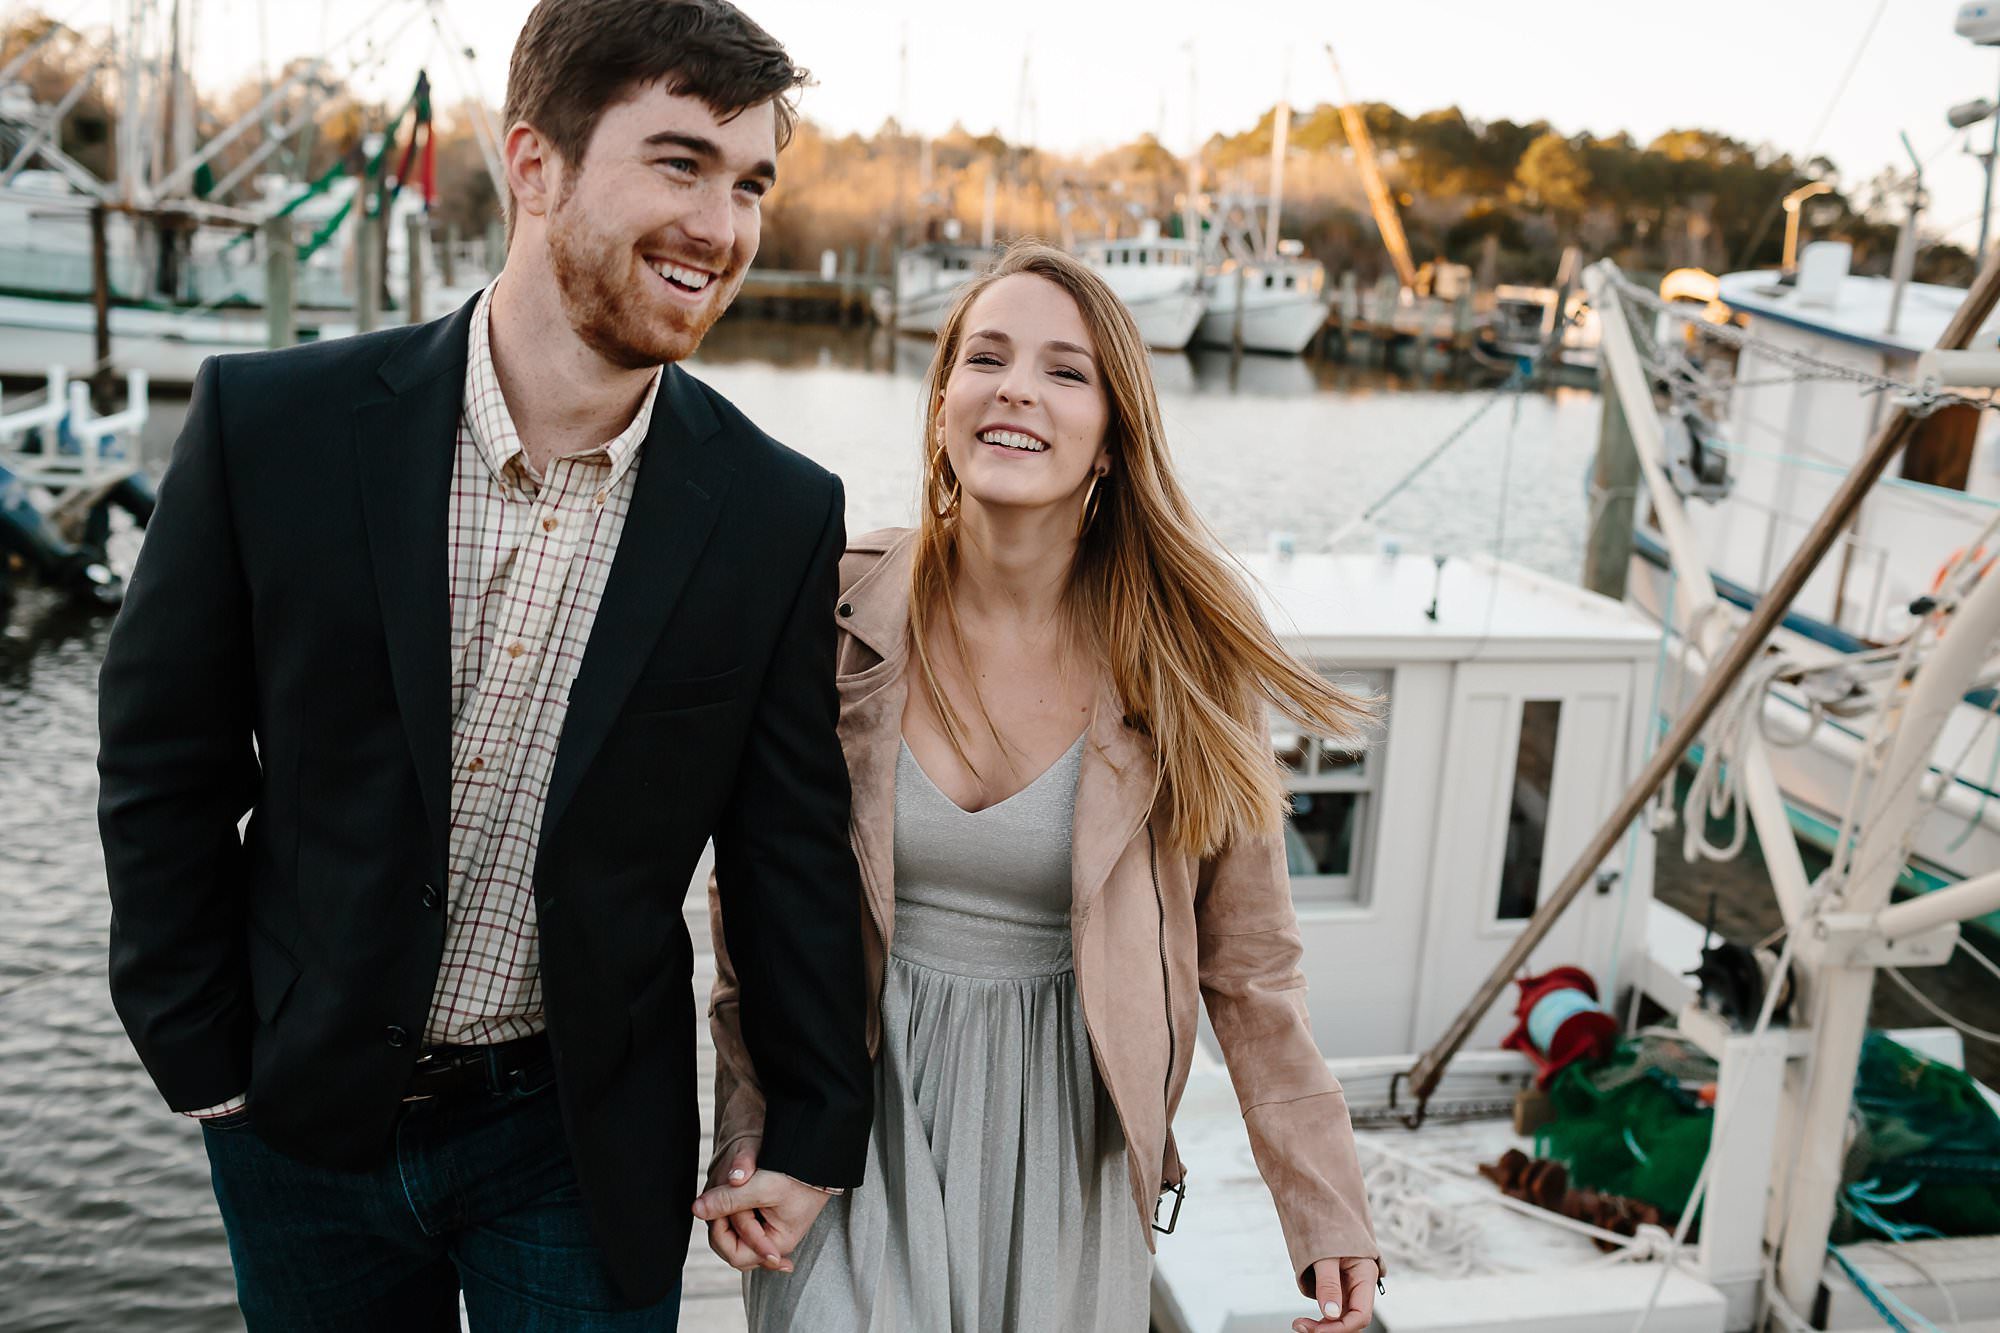 Turner and Megan hold hands leaving boat slip at the end of Market St in Apalachicola